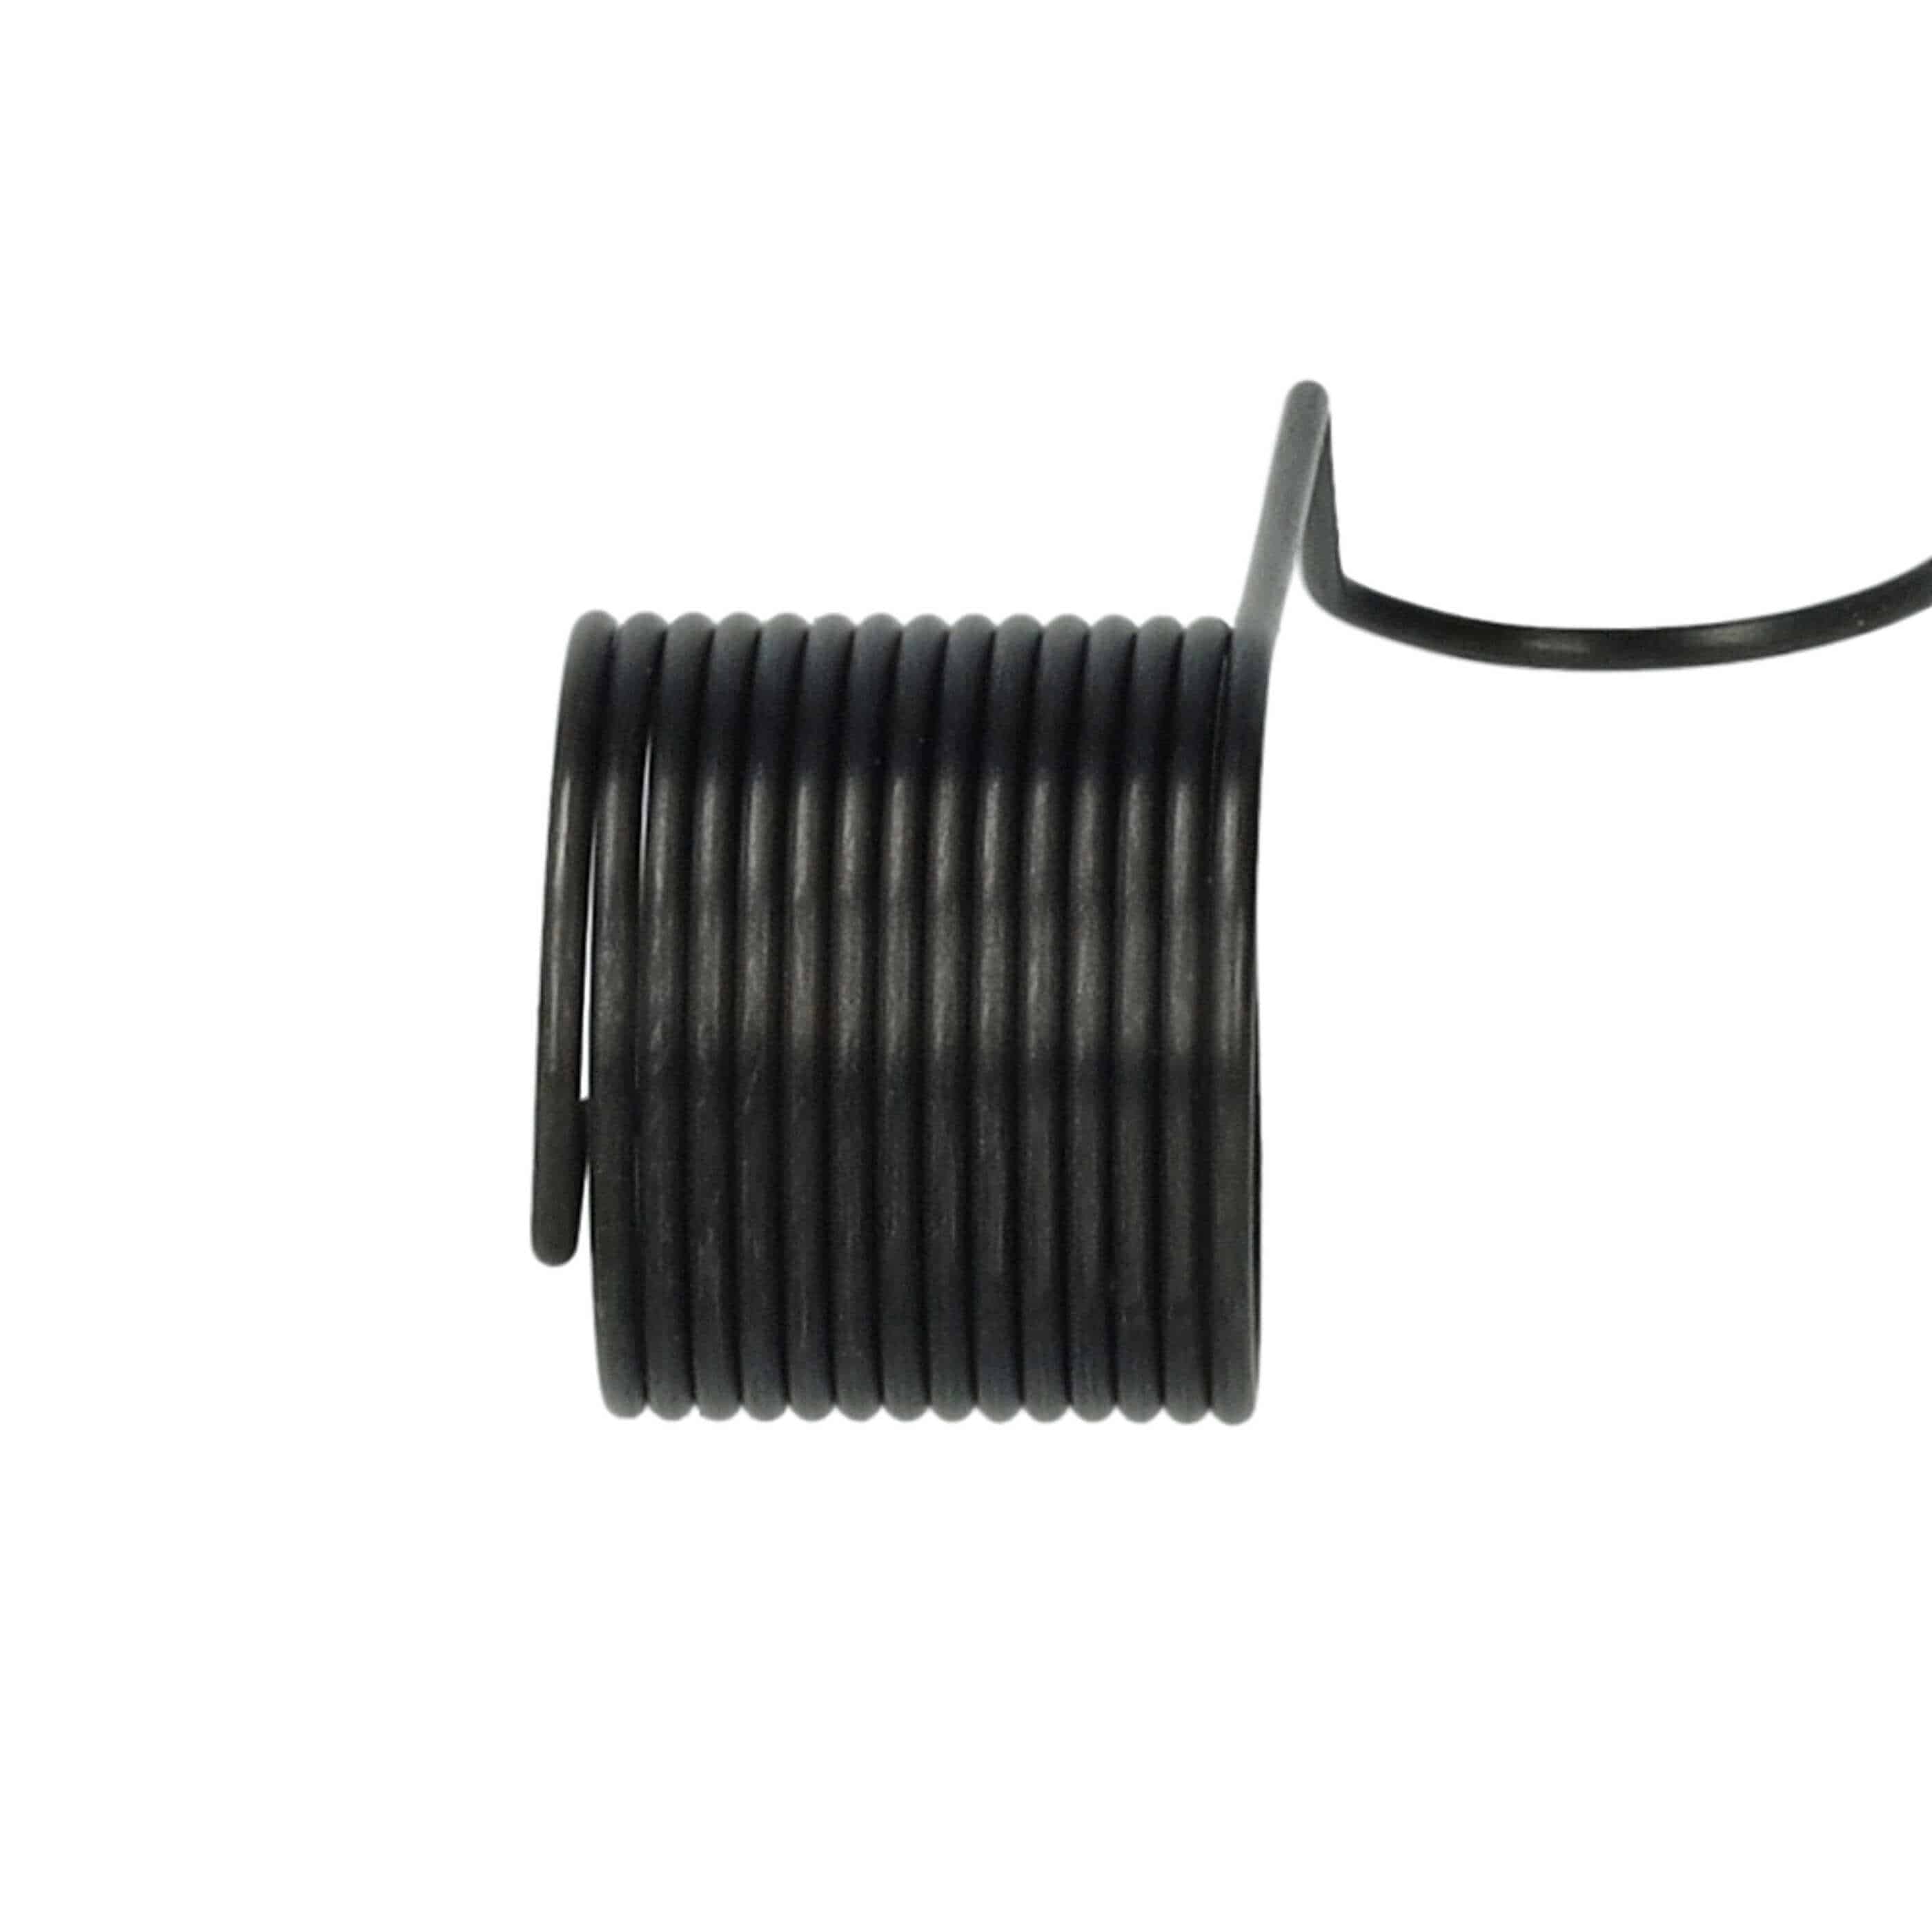 Thread Tension Spring replaces Brother 151011001 for Singer Sewing Machine etc.